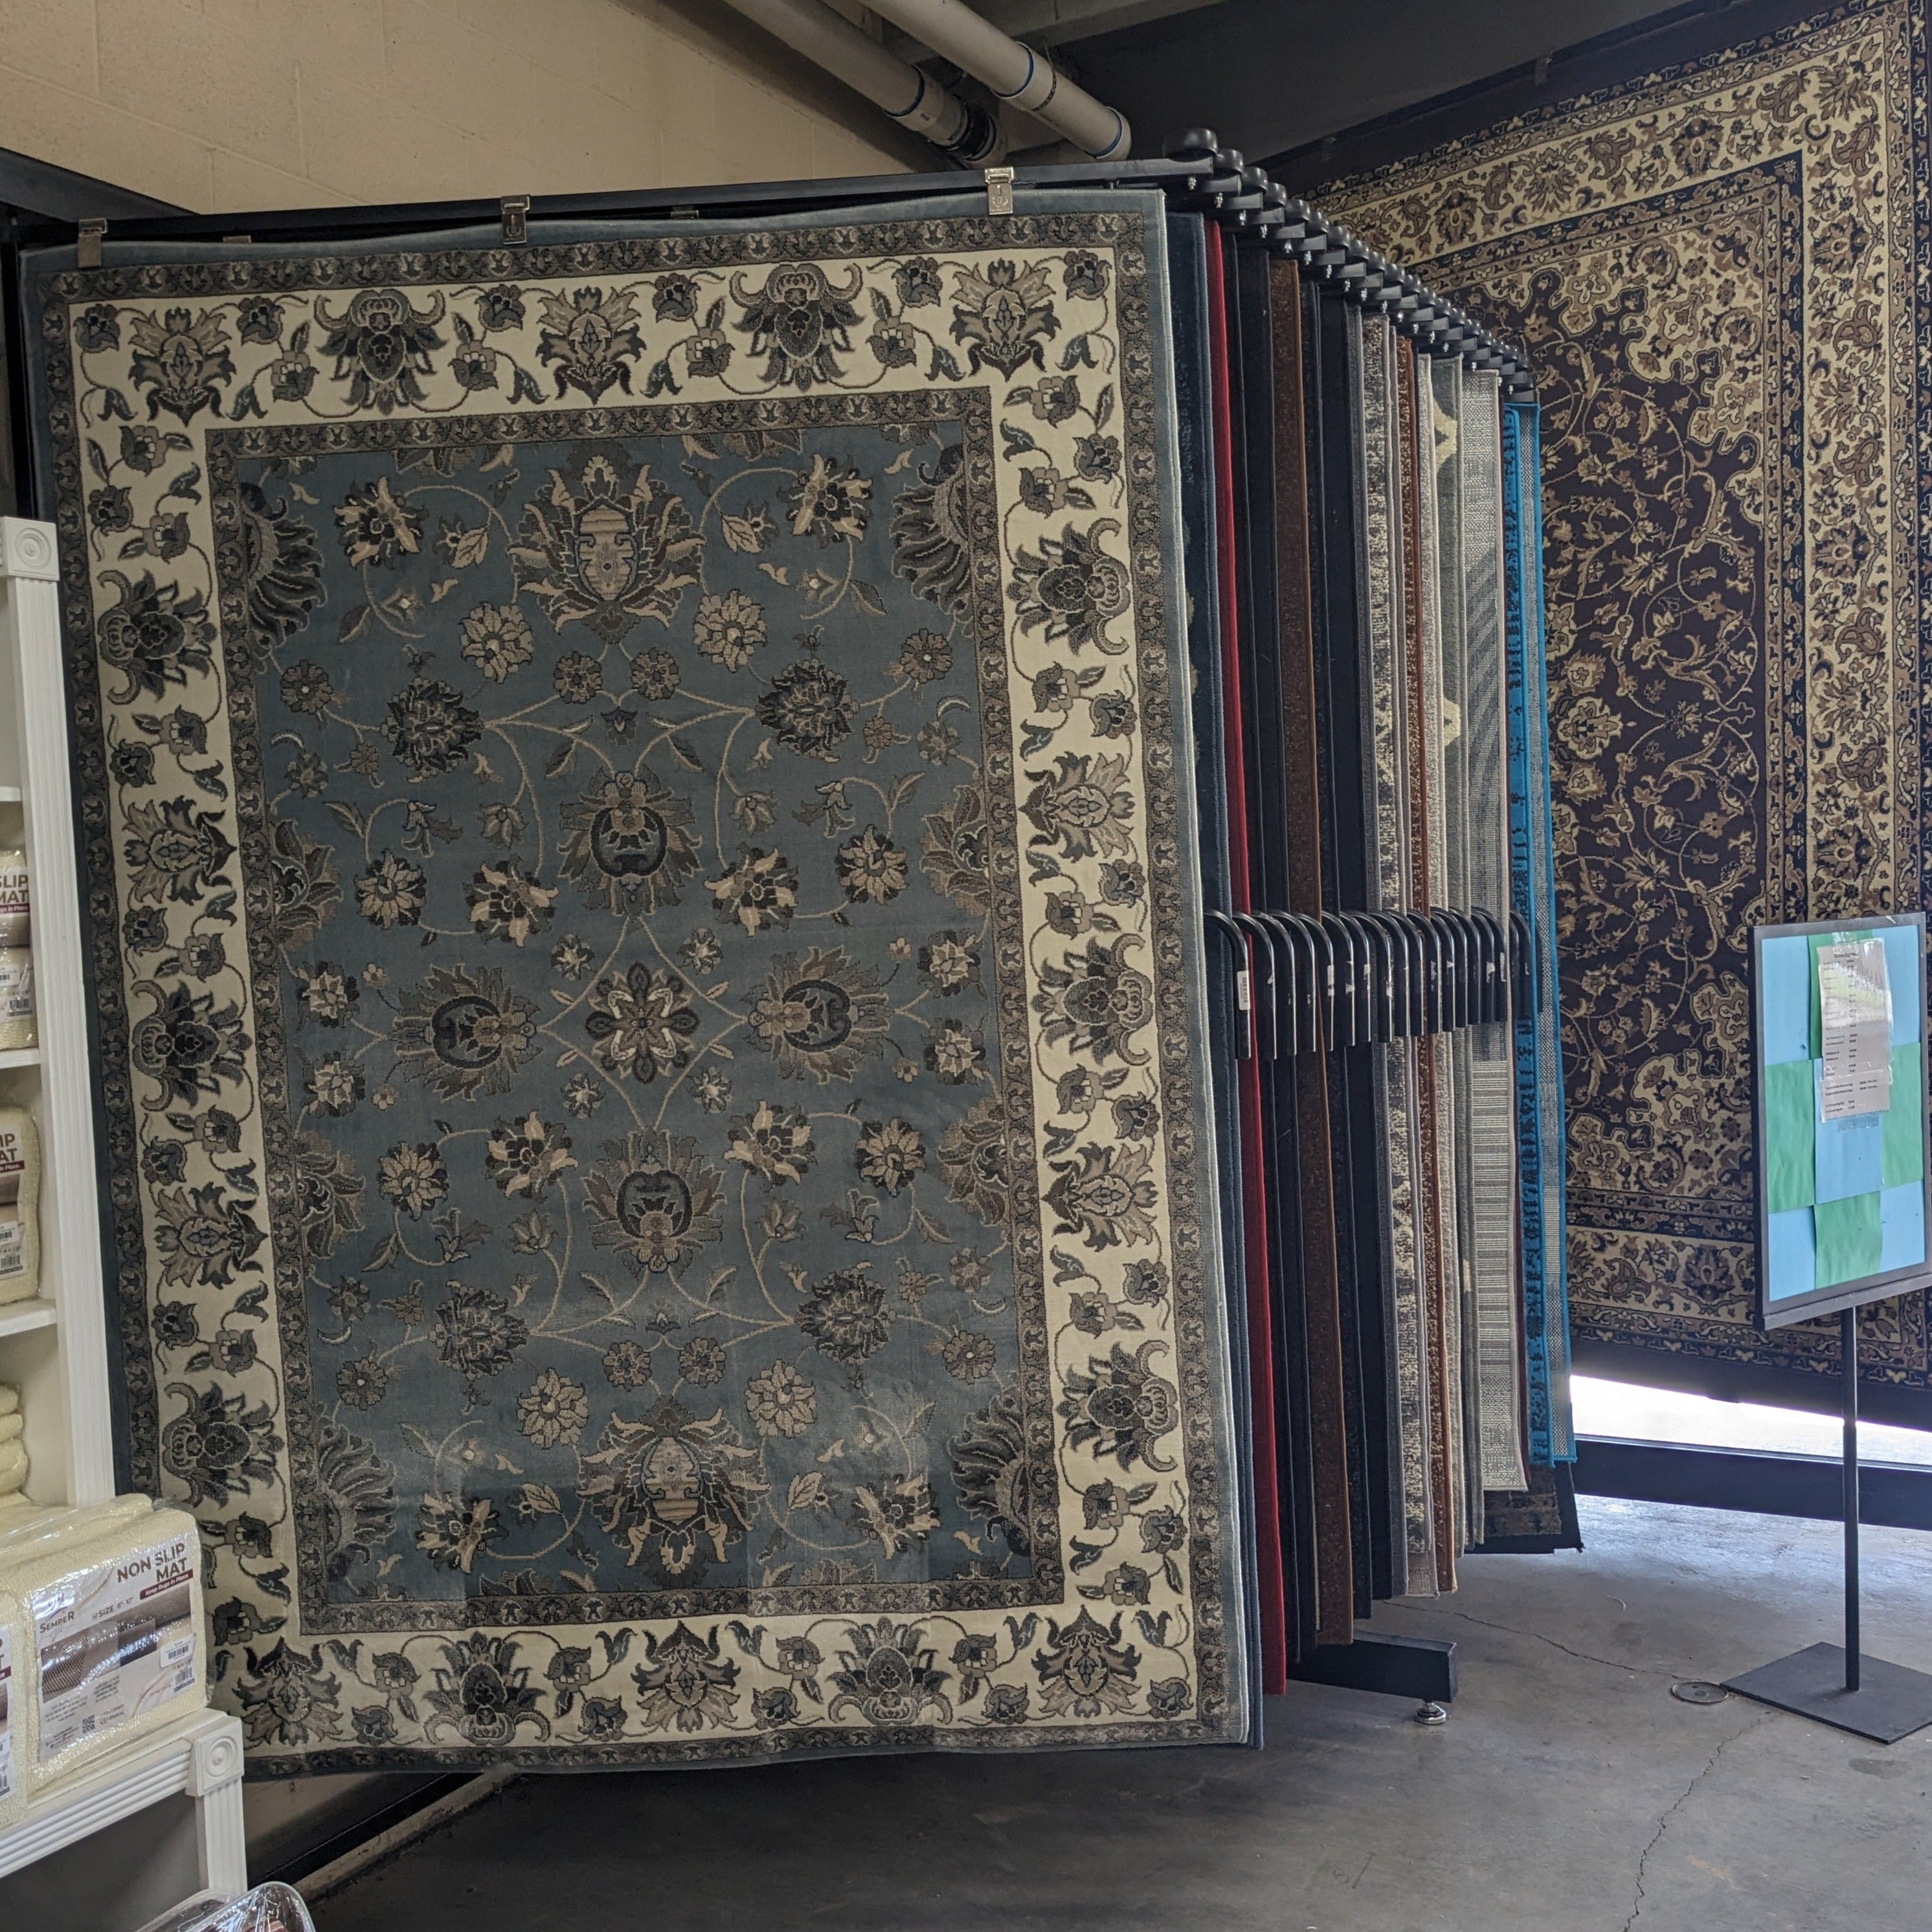 Area Rugs Available In-Store Only